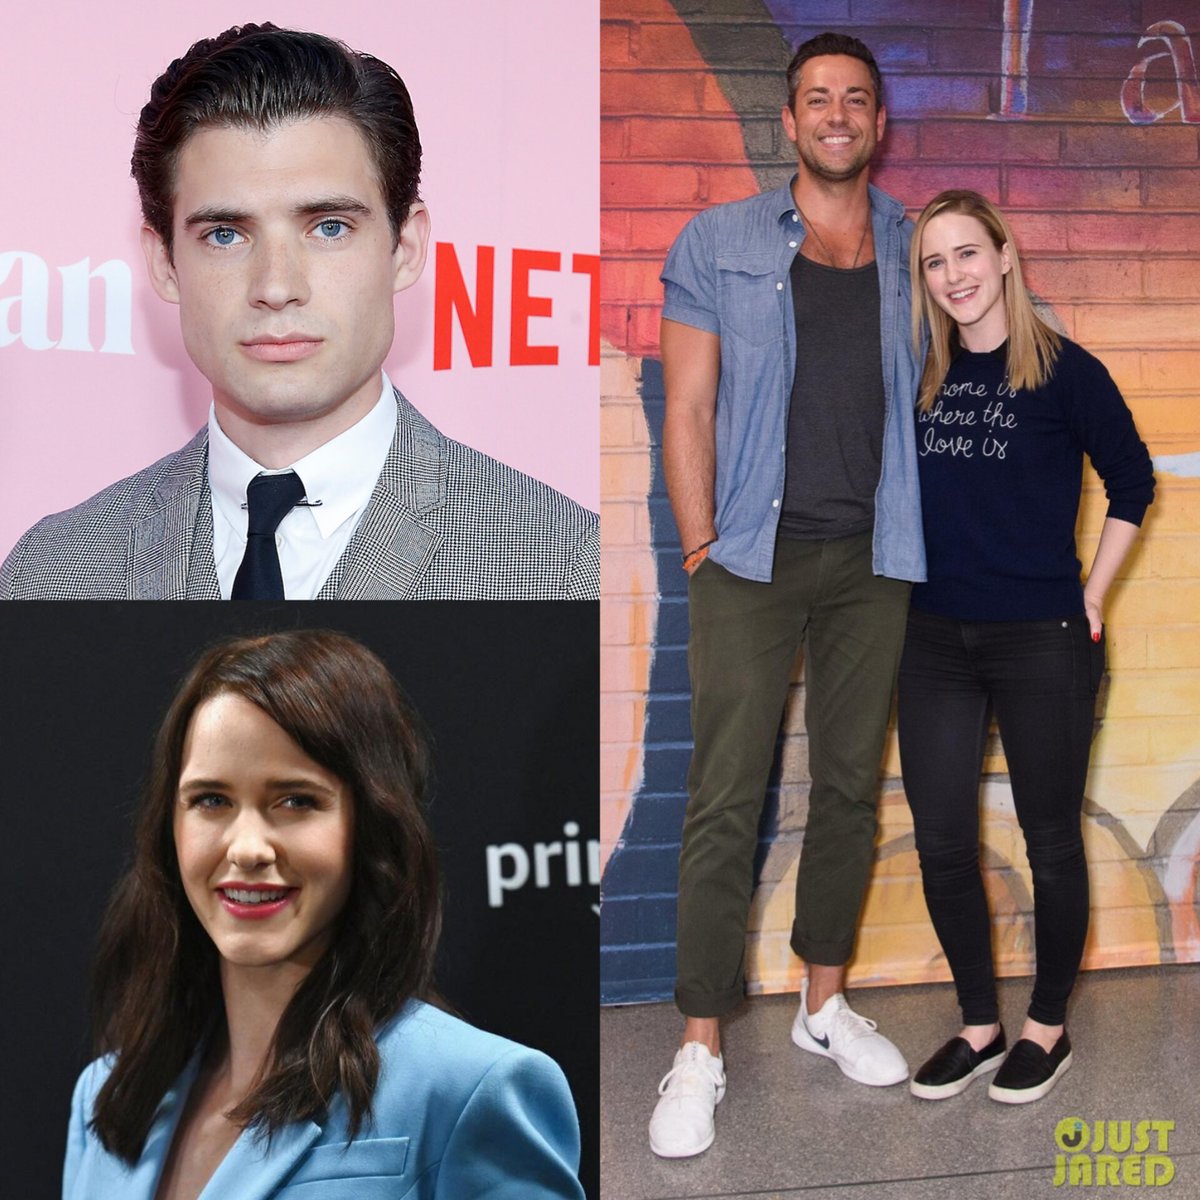 For our new Clark Kent and Lois Lane in Gunn's #SupermanLegacy this would be their height difference more or less. David Corenswet is 1.93m and Rachel Brosnahan is 1.61m. To compare it, on the right Brosnahan is alongside Zachary Levi who's 1.91m.